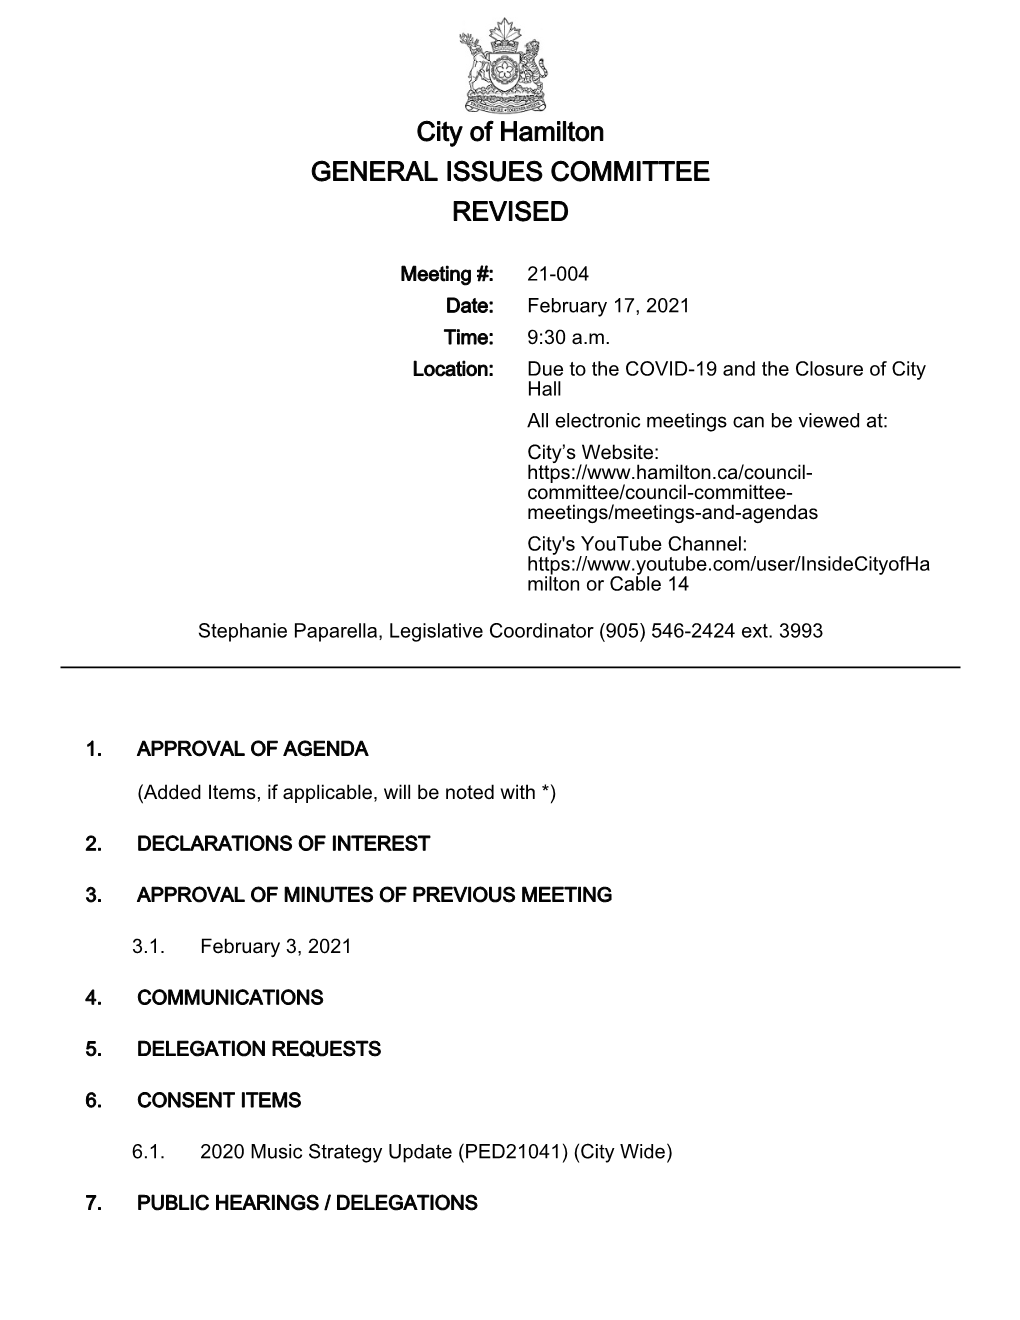 City of Hamilton GENERAL ISSUES COMMITTEE REVISED